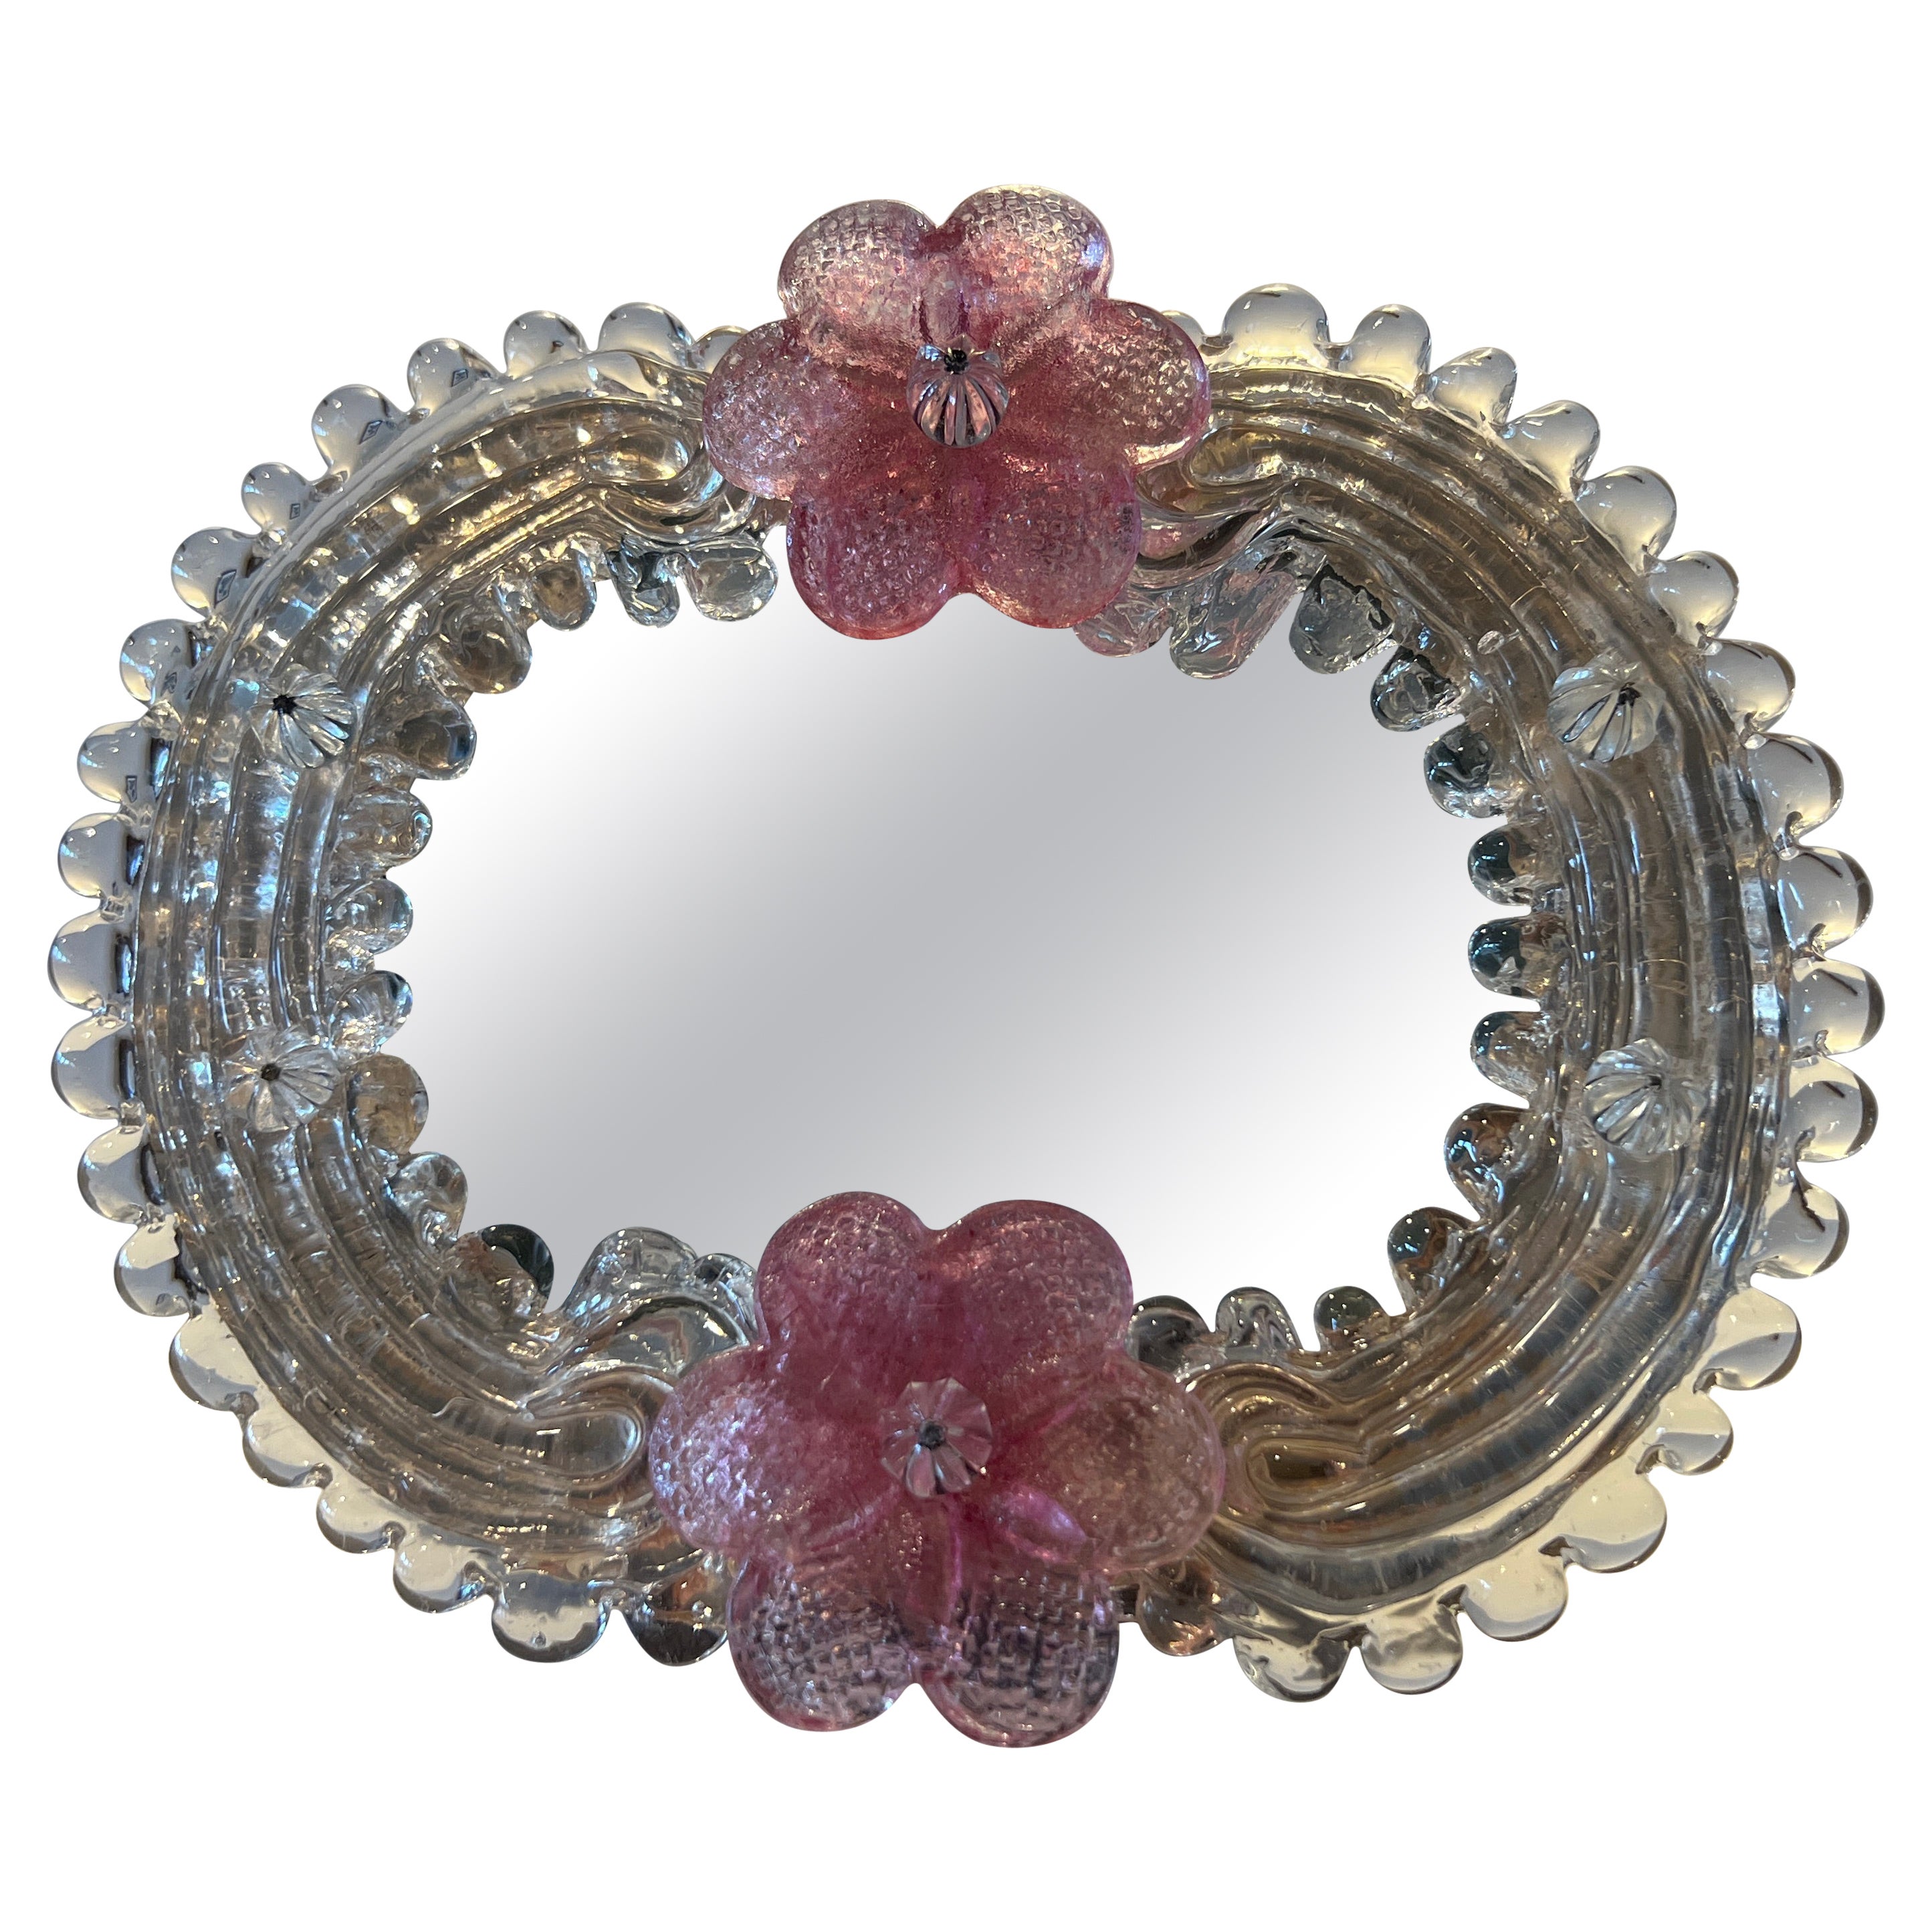 Vintage Pink Floral and Gold Leaf Venetian Glass Mirror - Wall or Table Top 